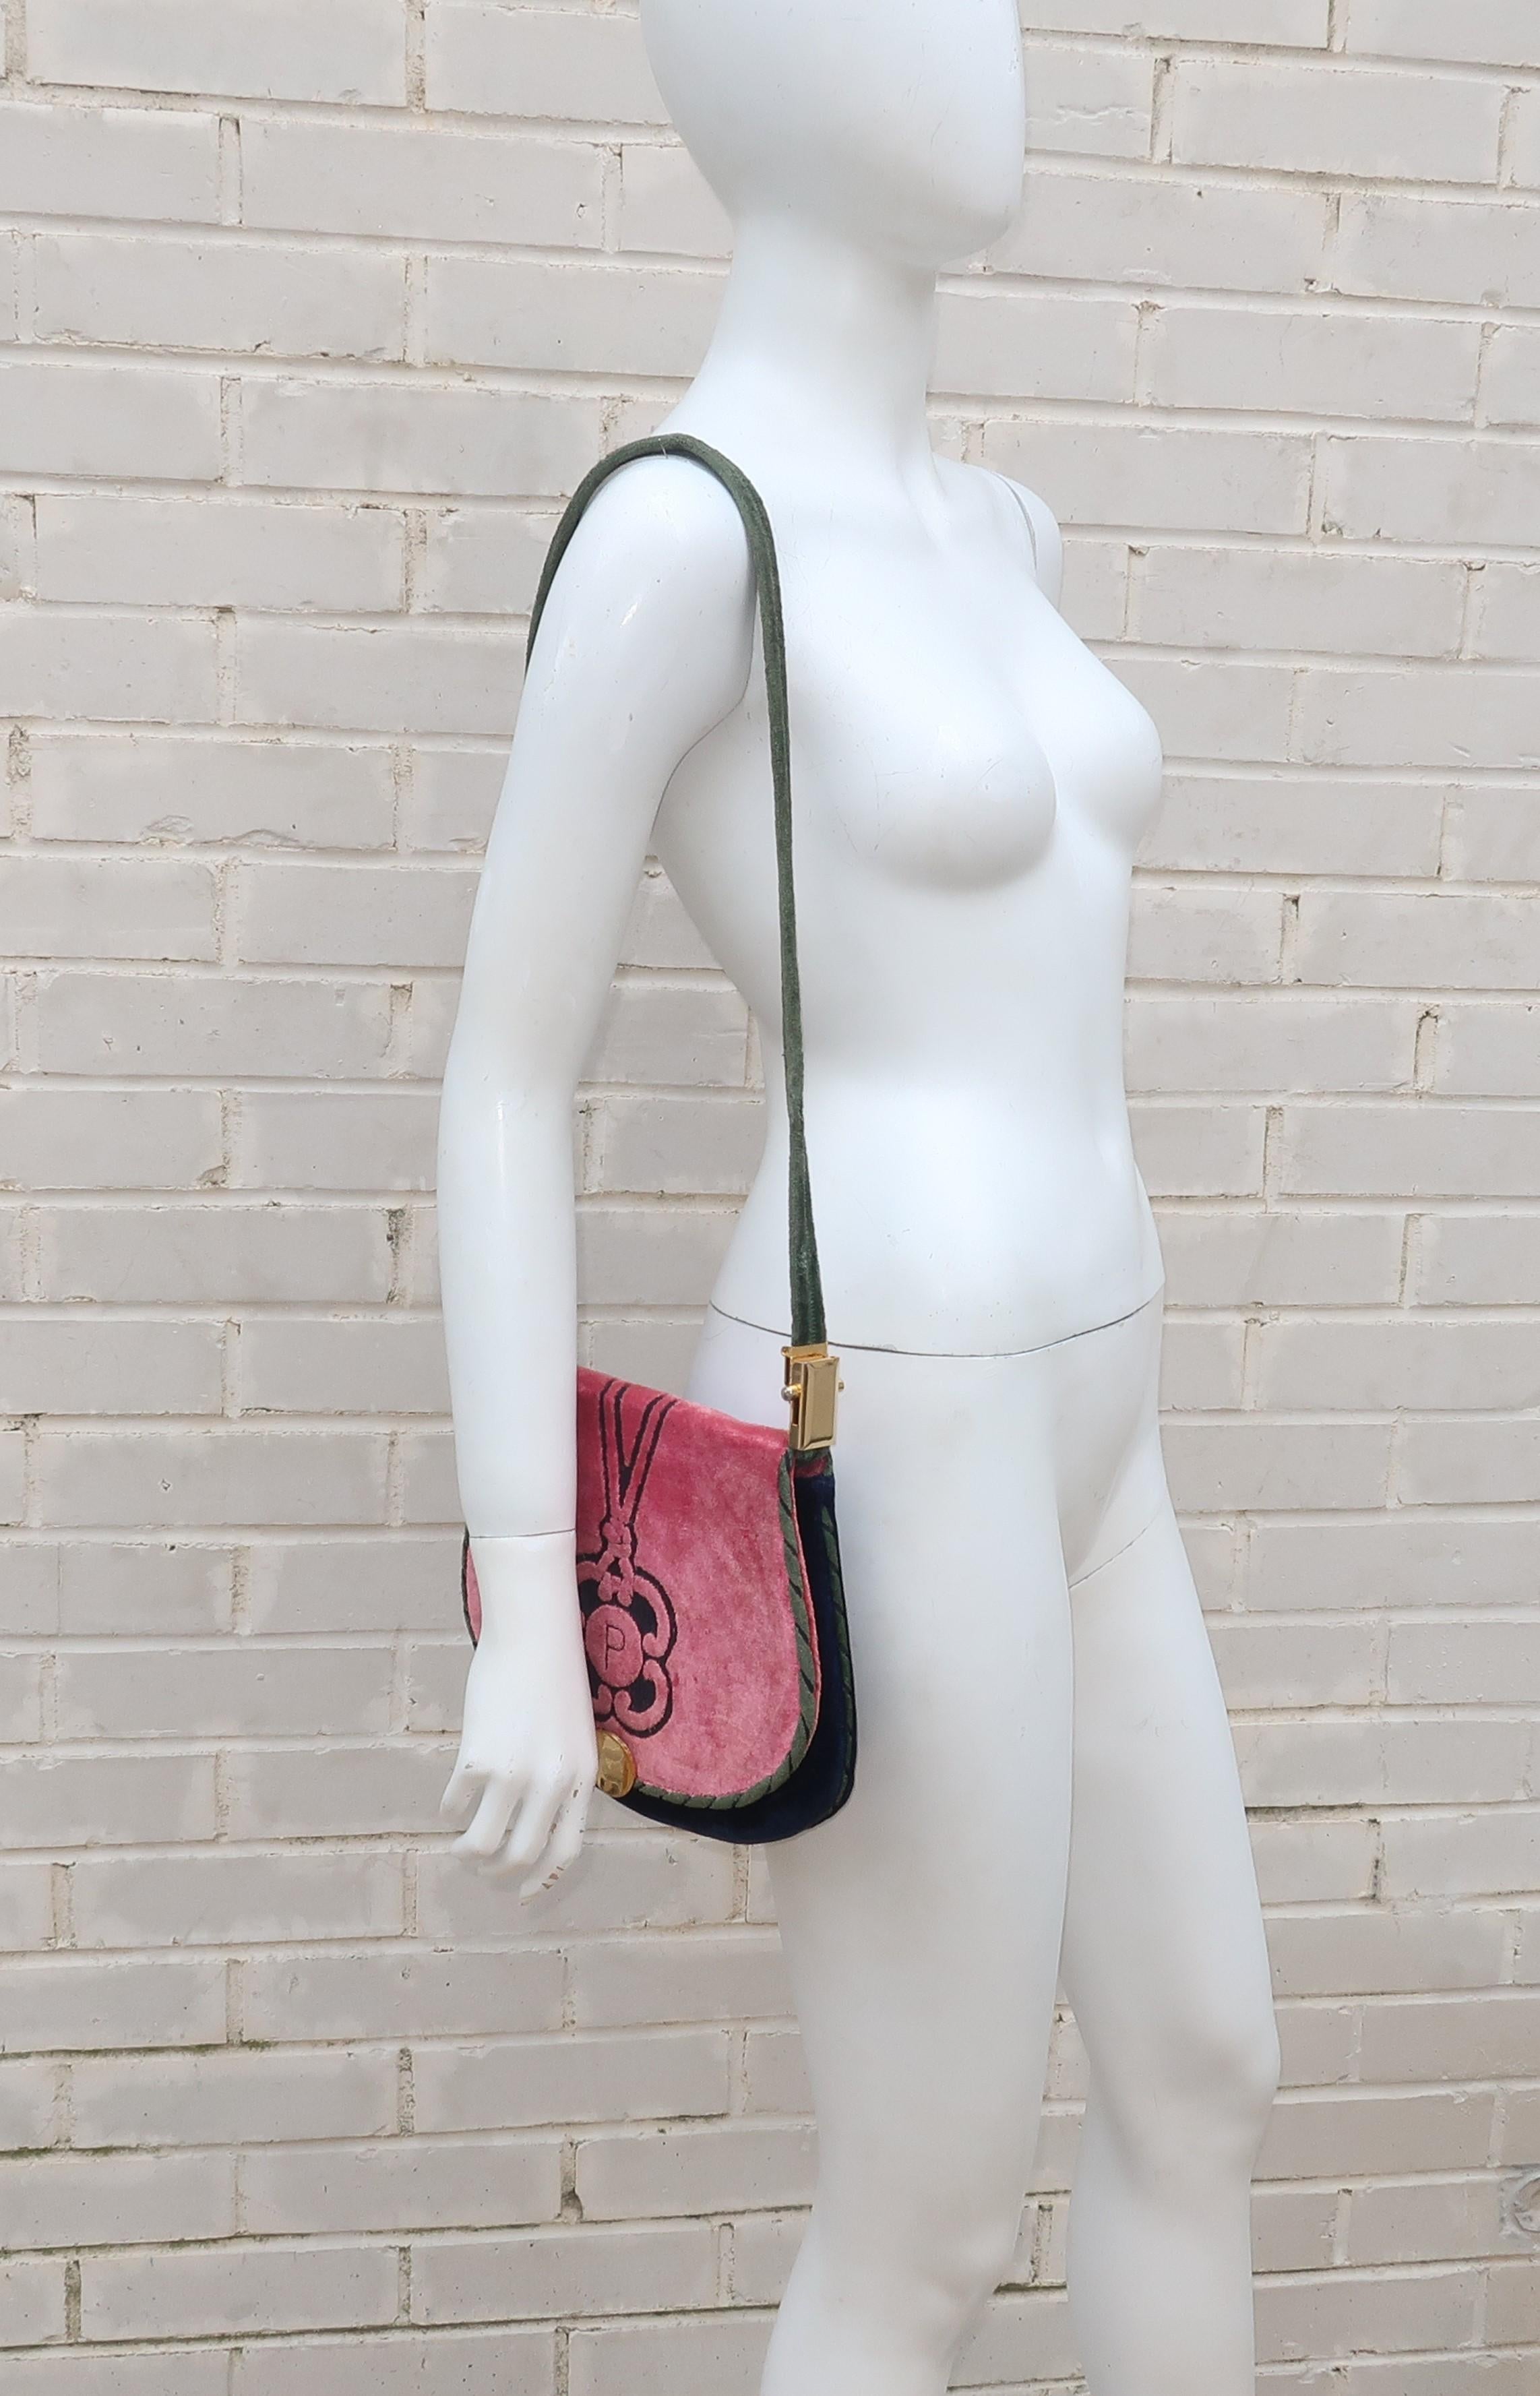 This C.1970 Cesare Piccini handbag is fabricated from a combination of blue, green and an eye catching watermelon pink velvet.  It features an adjustable shoulder strap which converts from long to short with a simple slide of a gold tone buckle. 